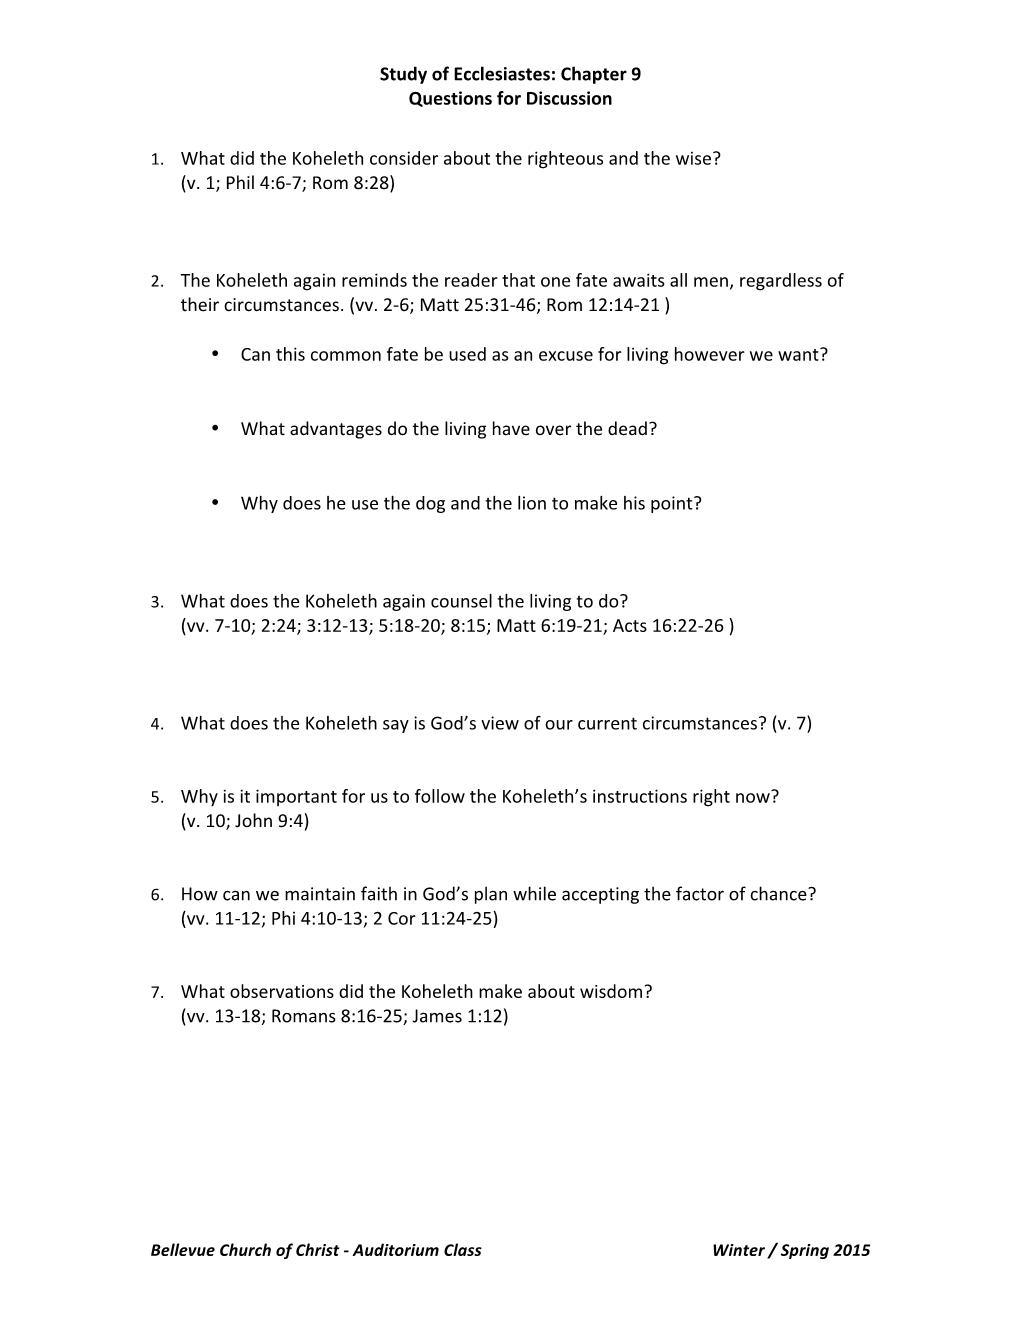 Study of Ecclesiastes: Chapter 9 Questions for Discussion 1. What Did the Koheleth Consider About